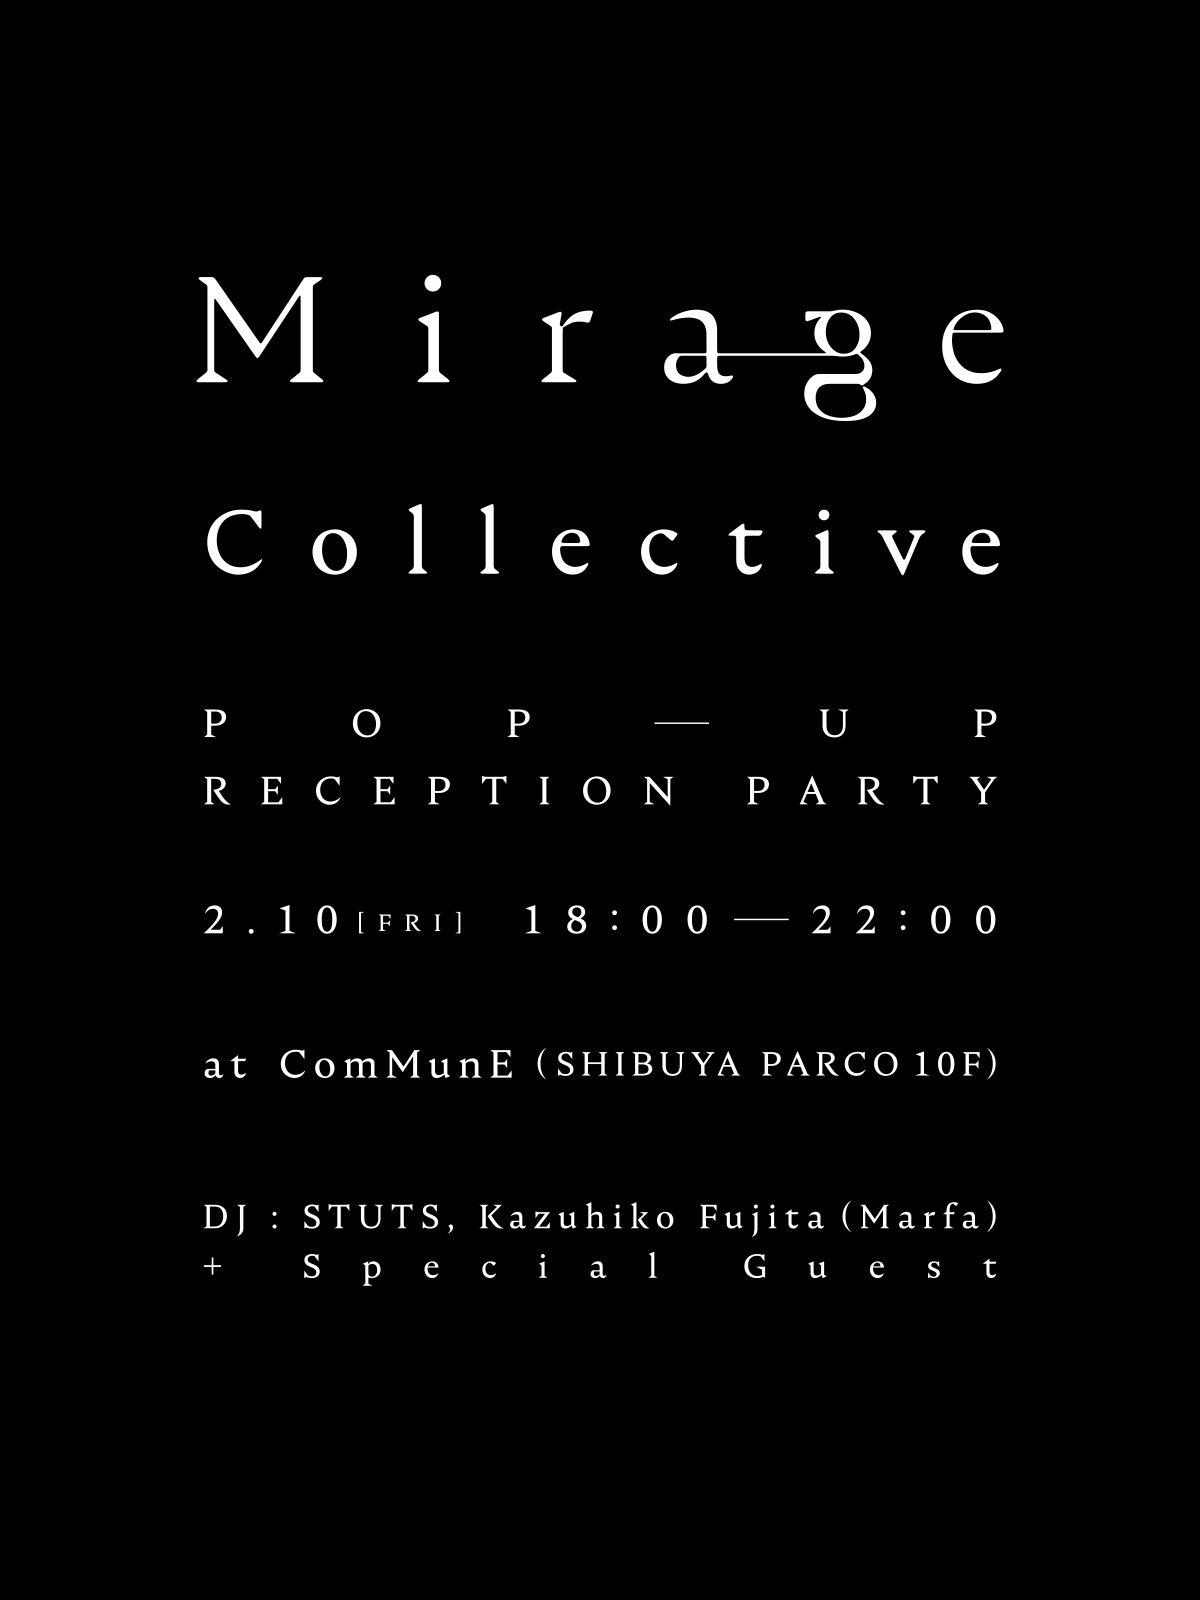 Mirage Collective POP UP RECEPTION PARTY